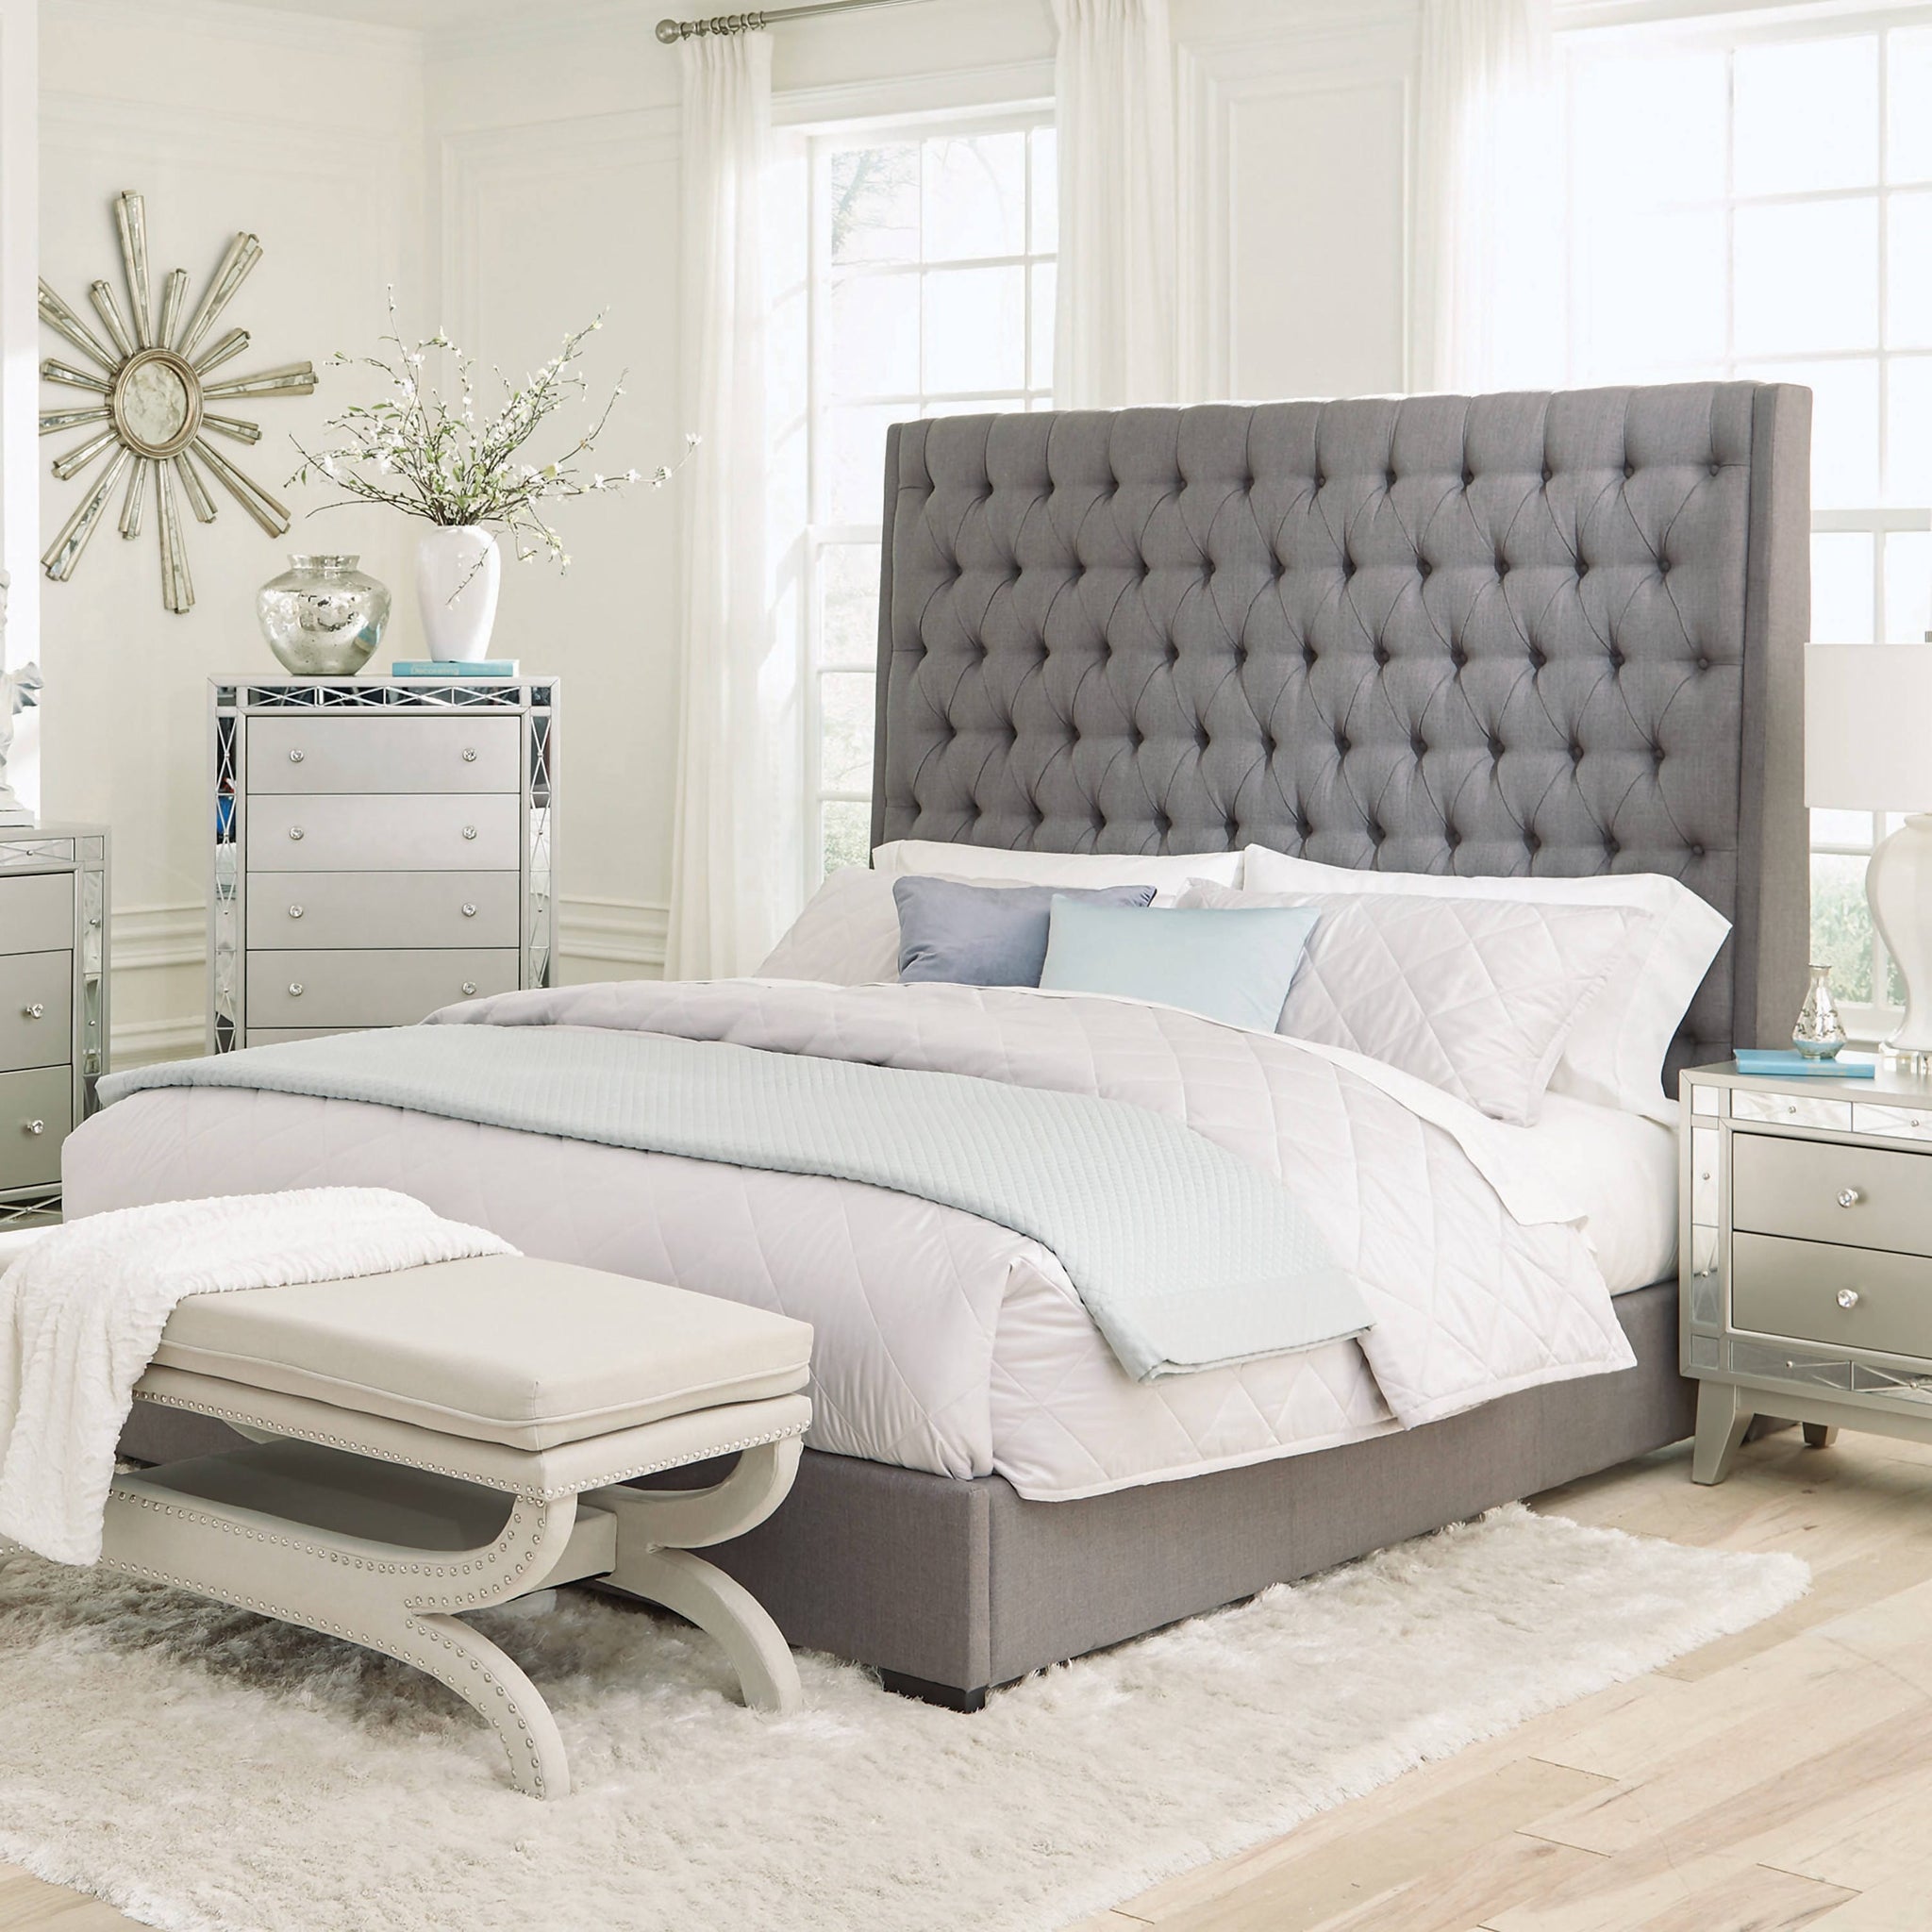 Camille California King Button Tufted Bed Grey Collection: The Impressively-Styled Bed Makes A Bold Yet Fashionable Statement, This Bed Is A Graceful Addition To The Bedroom. Camille SKU: 300621KW